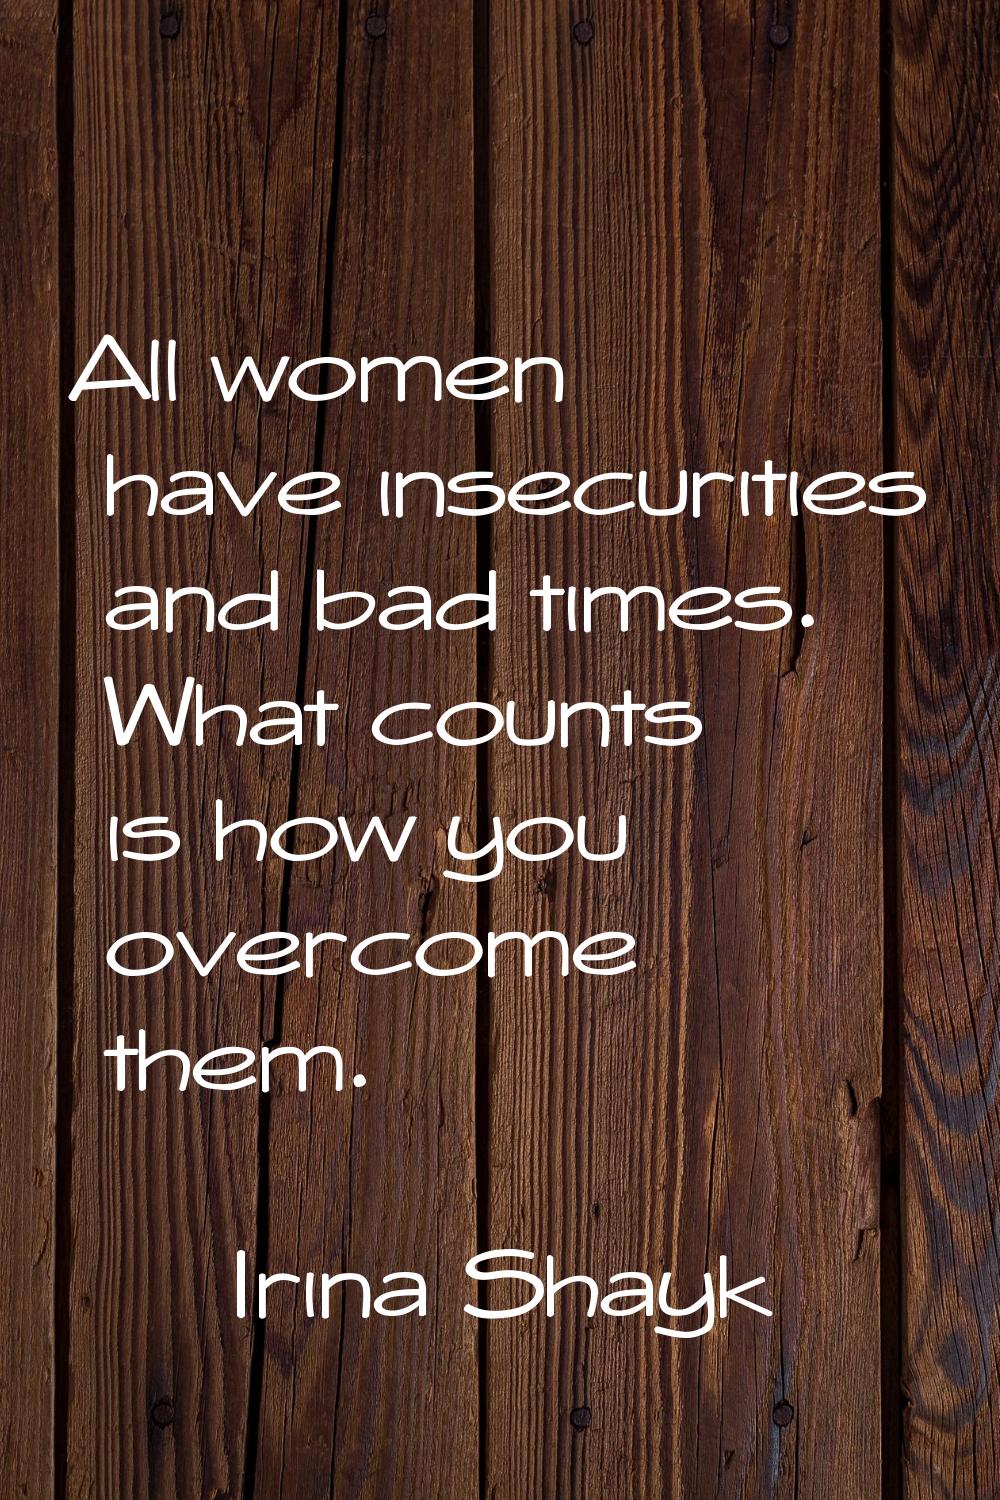 All women have insecurities and bad times. What counts is how you overcome them.